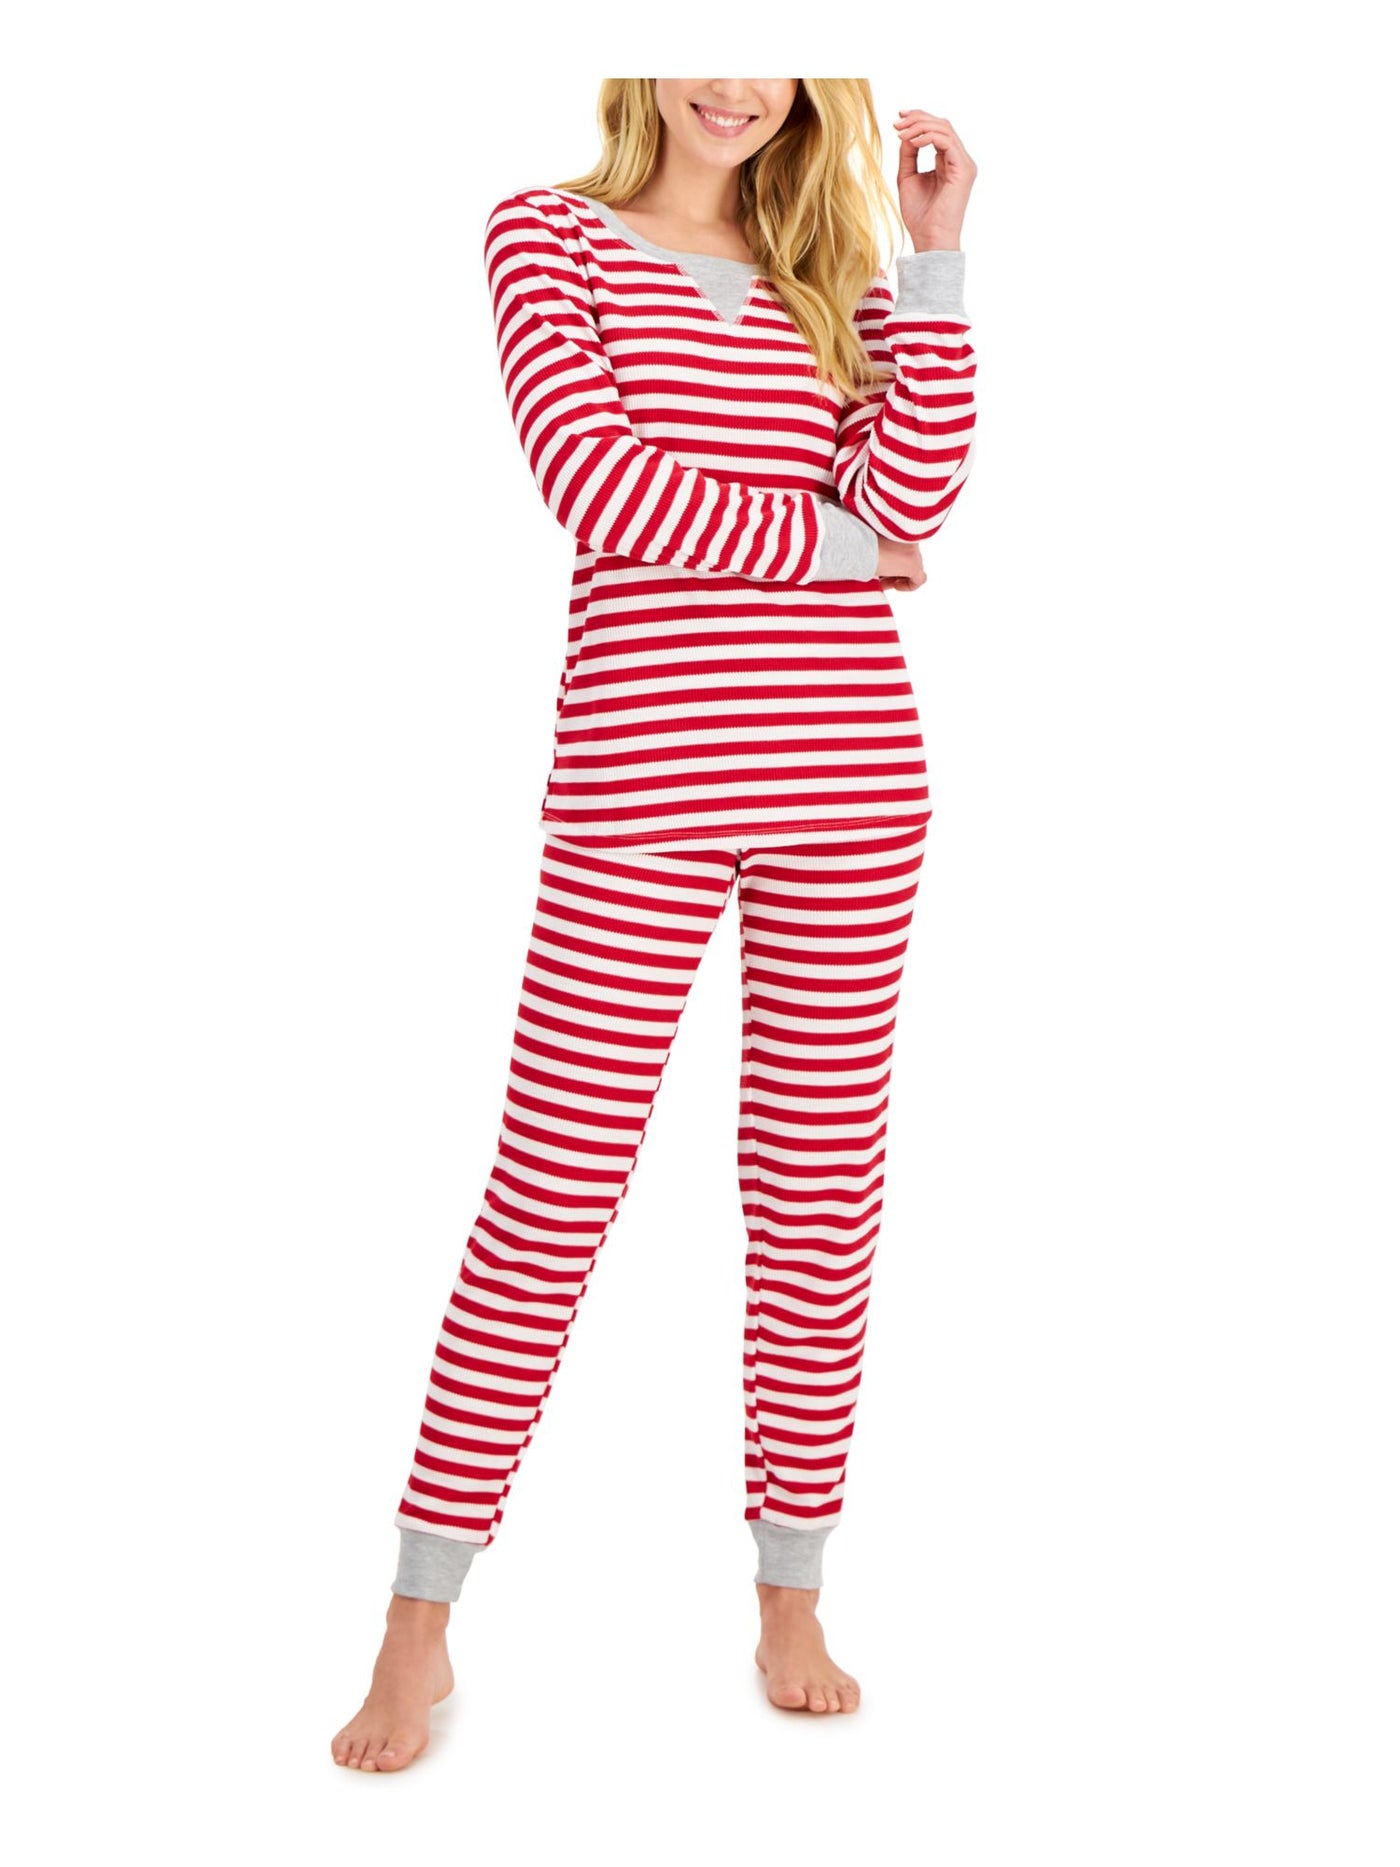 FAMILY PJs Womens Red Striped Top Ribbed Long Sleeve Cuffed Pants Pajamas XS